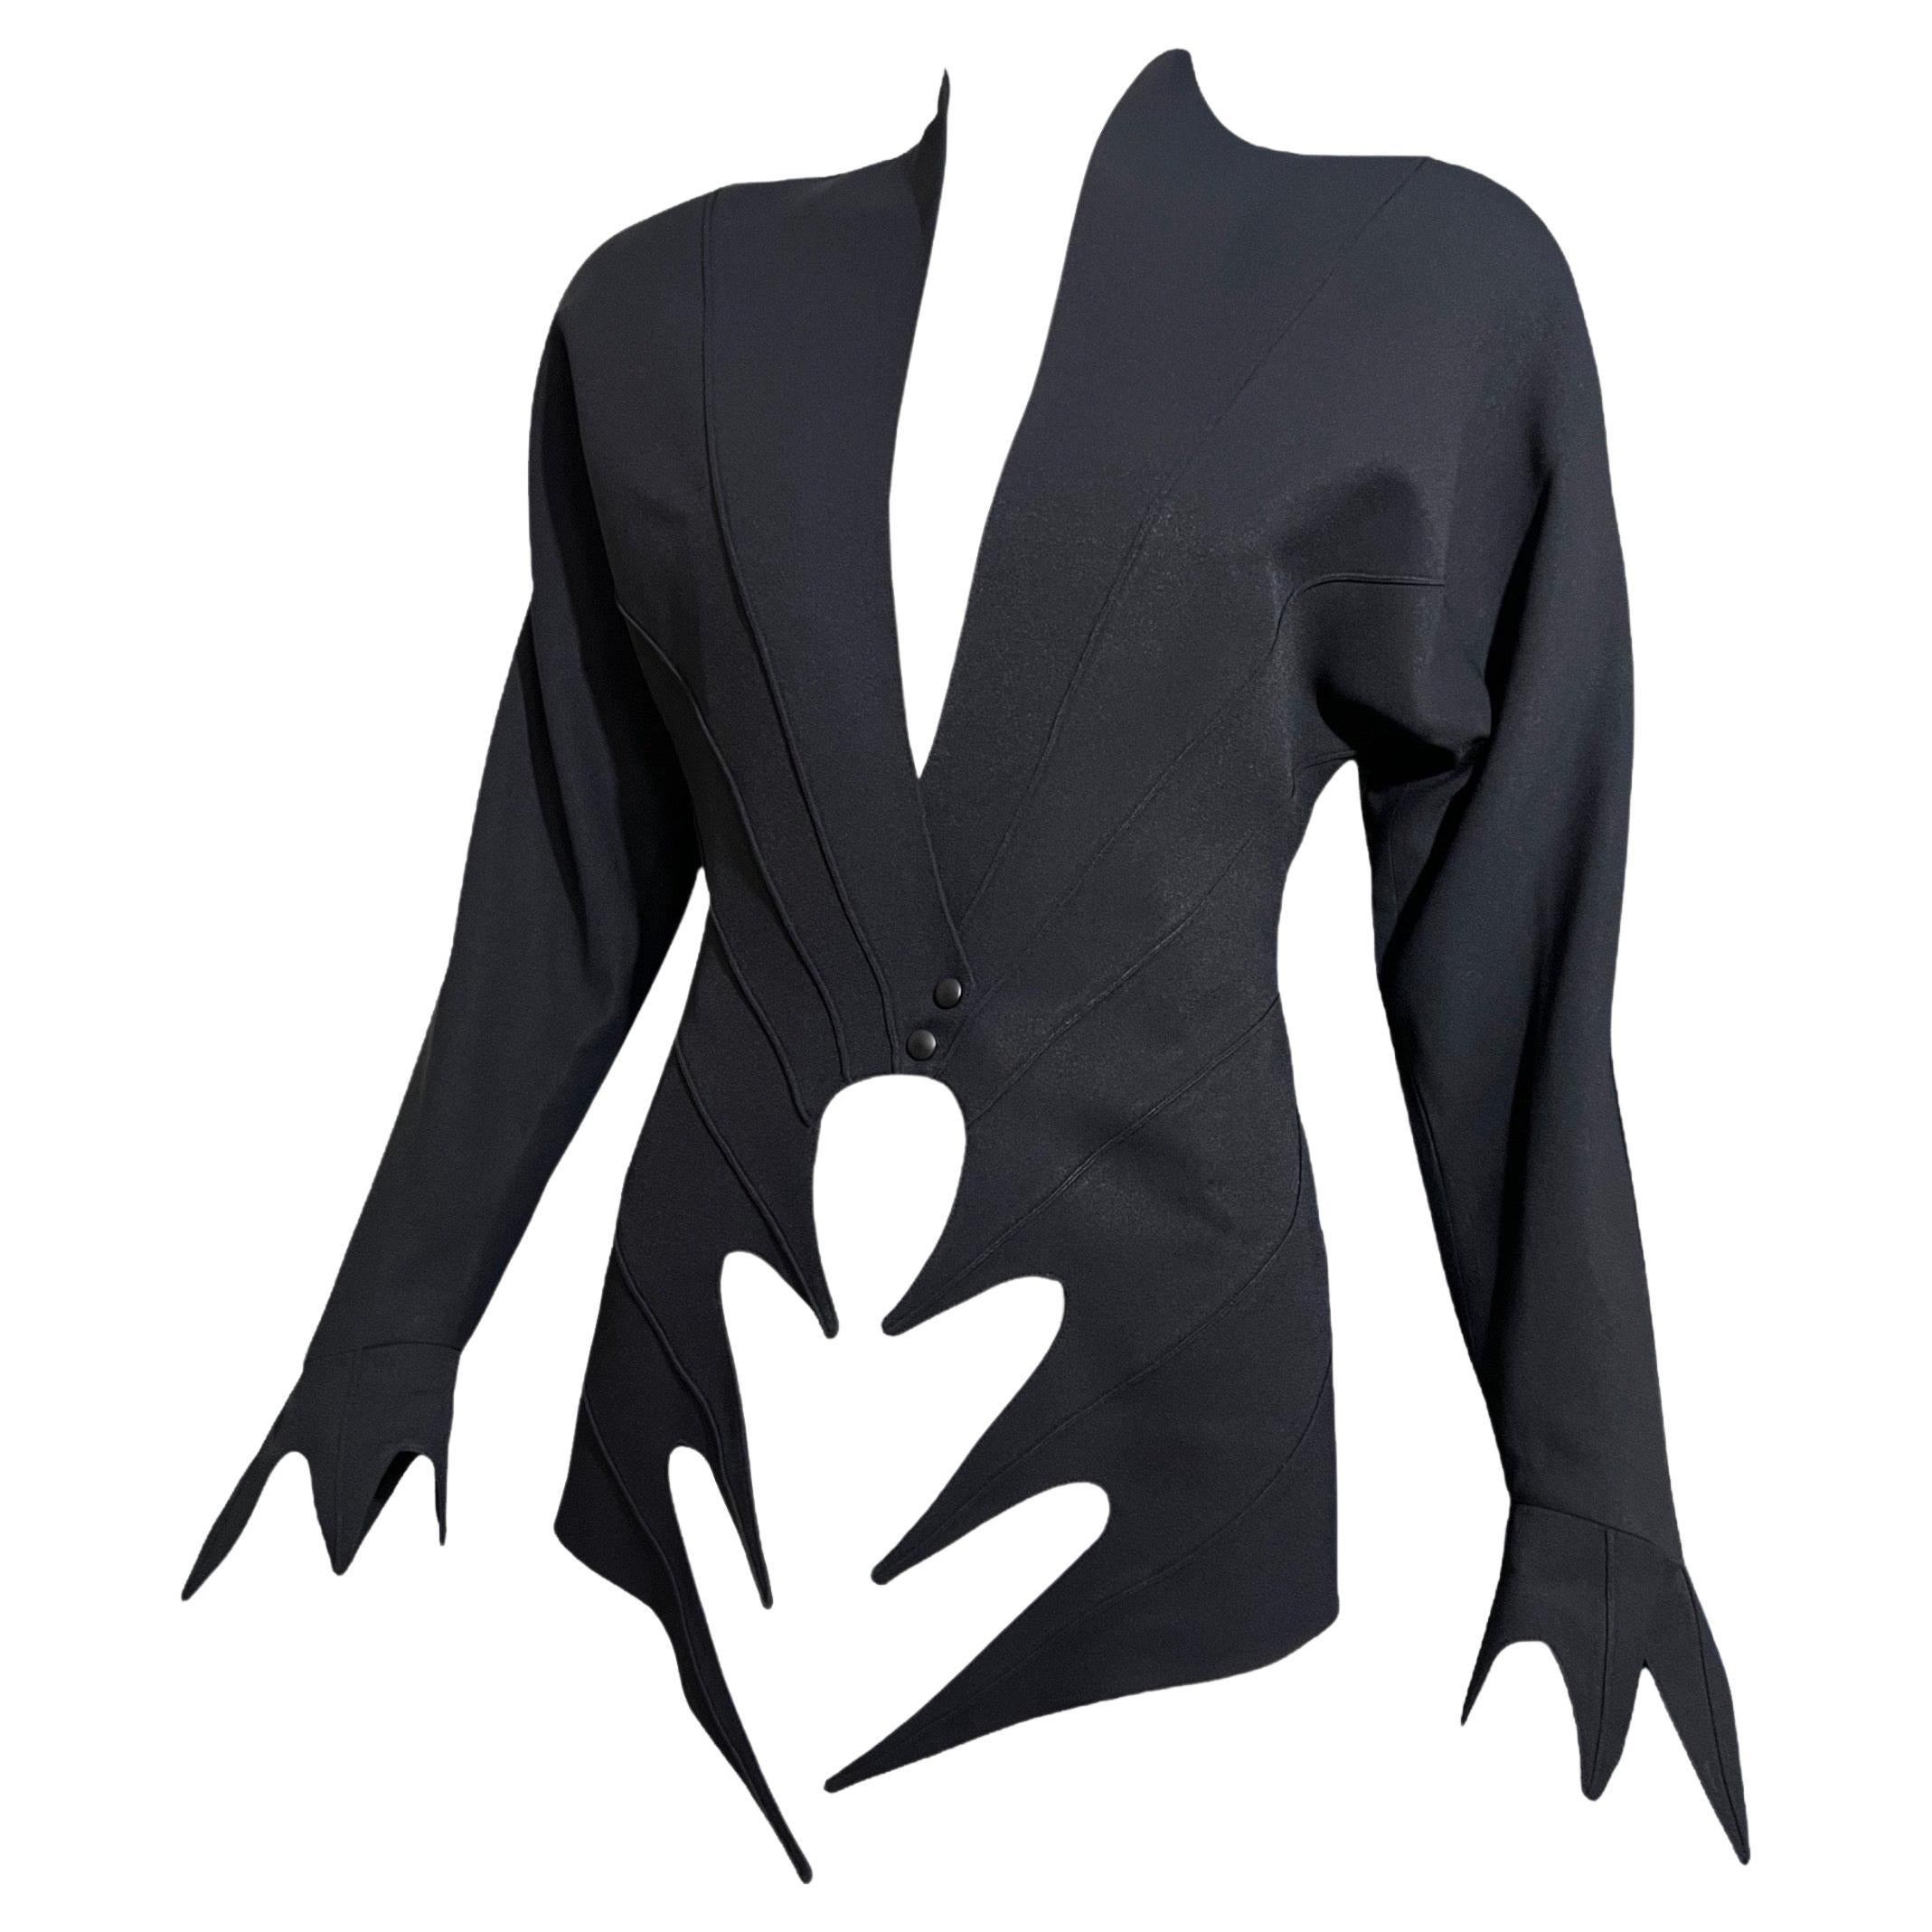 S/S 1989 Thierry Mugler Runway Sculptural Black Pointed Cutout Jacket  In Excellent Condition For Sale In Concord, NC